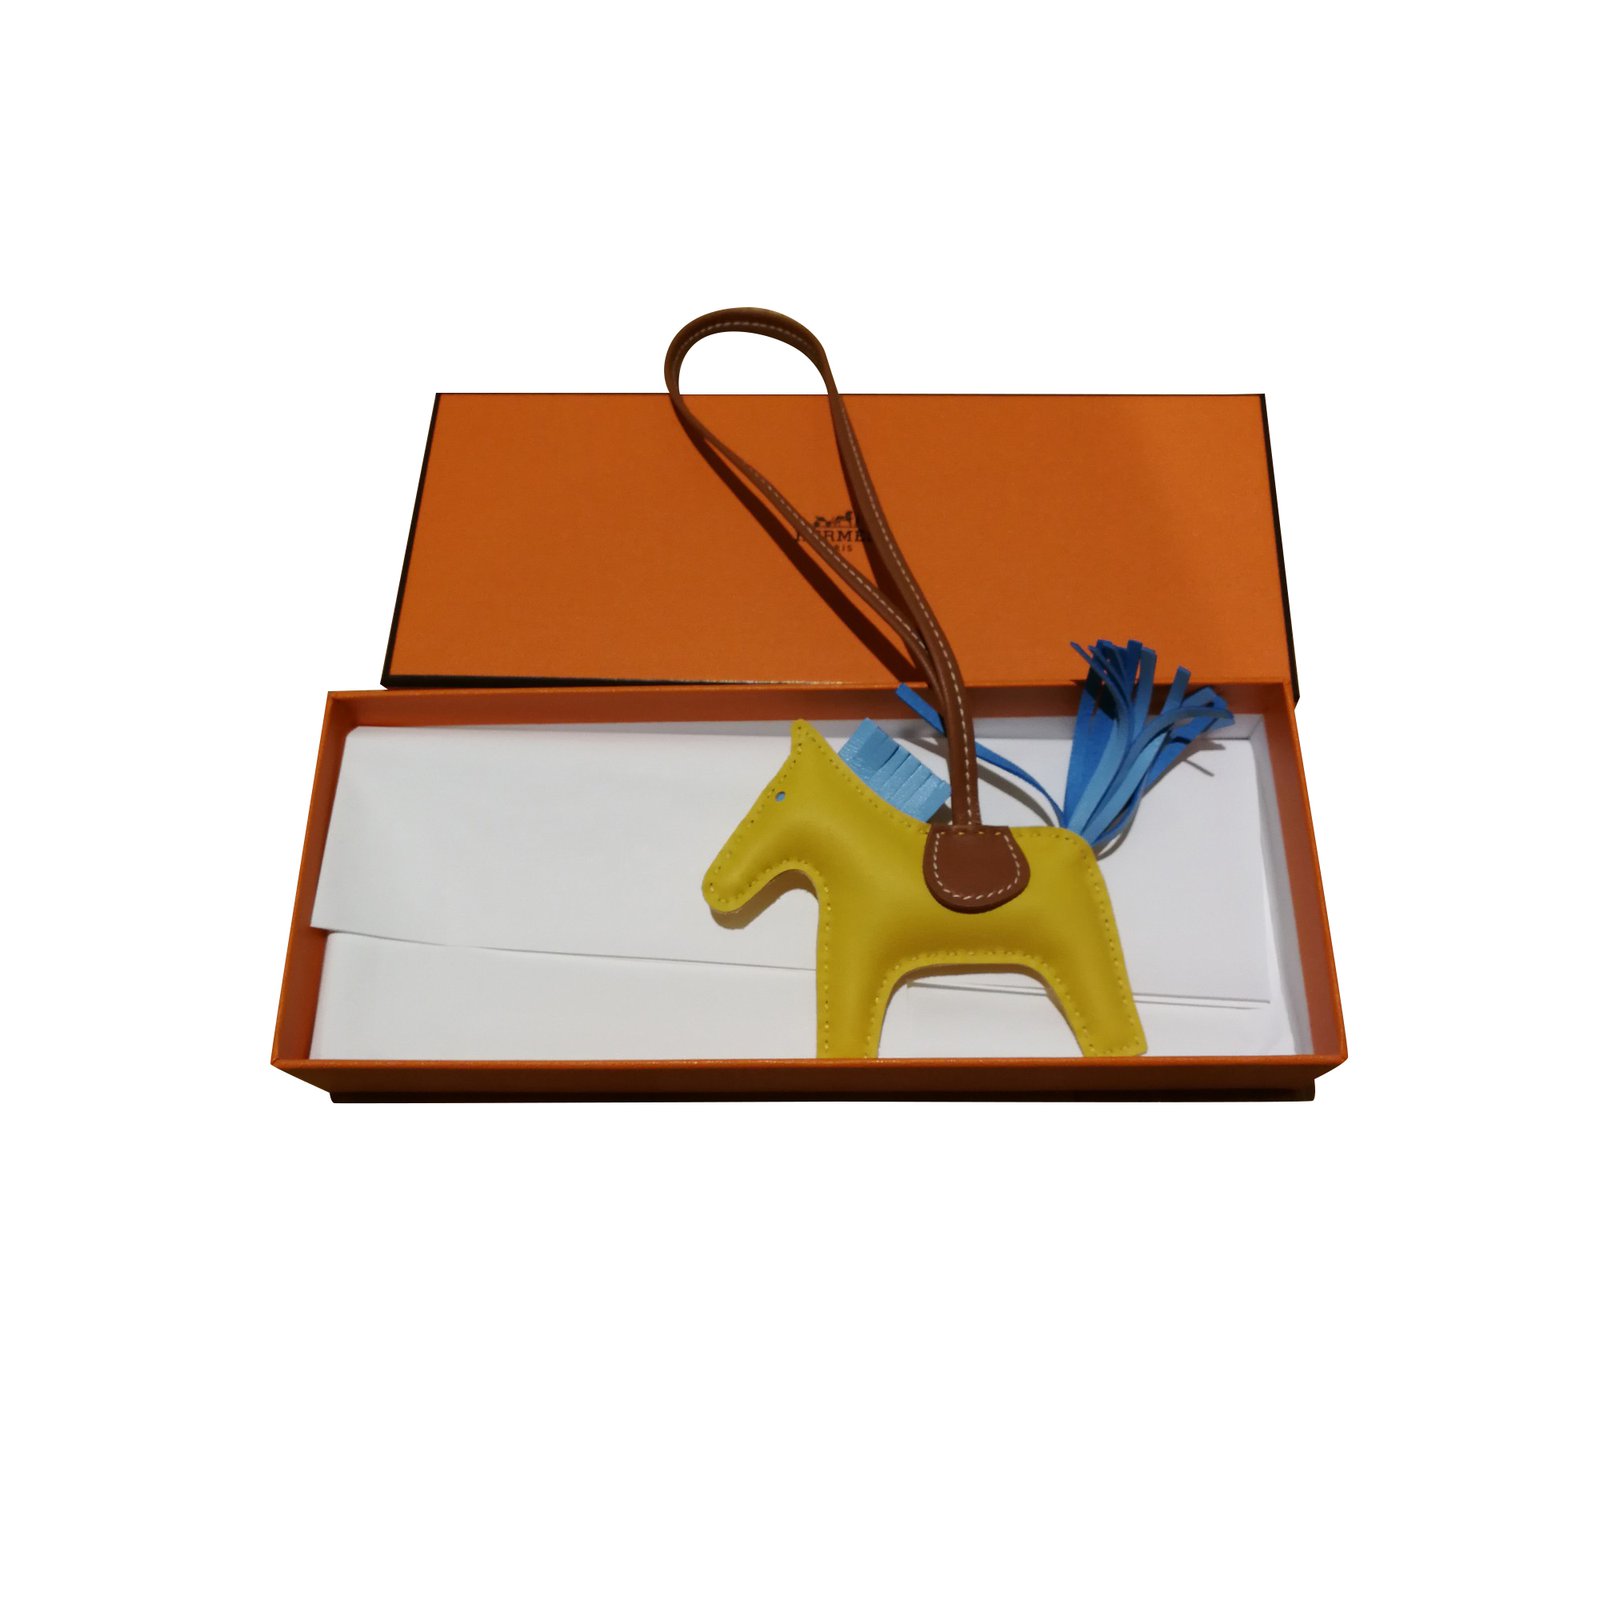 HERMES Horse Rodeo PM Bag accessories Bag Charm Lambskin Leather